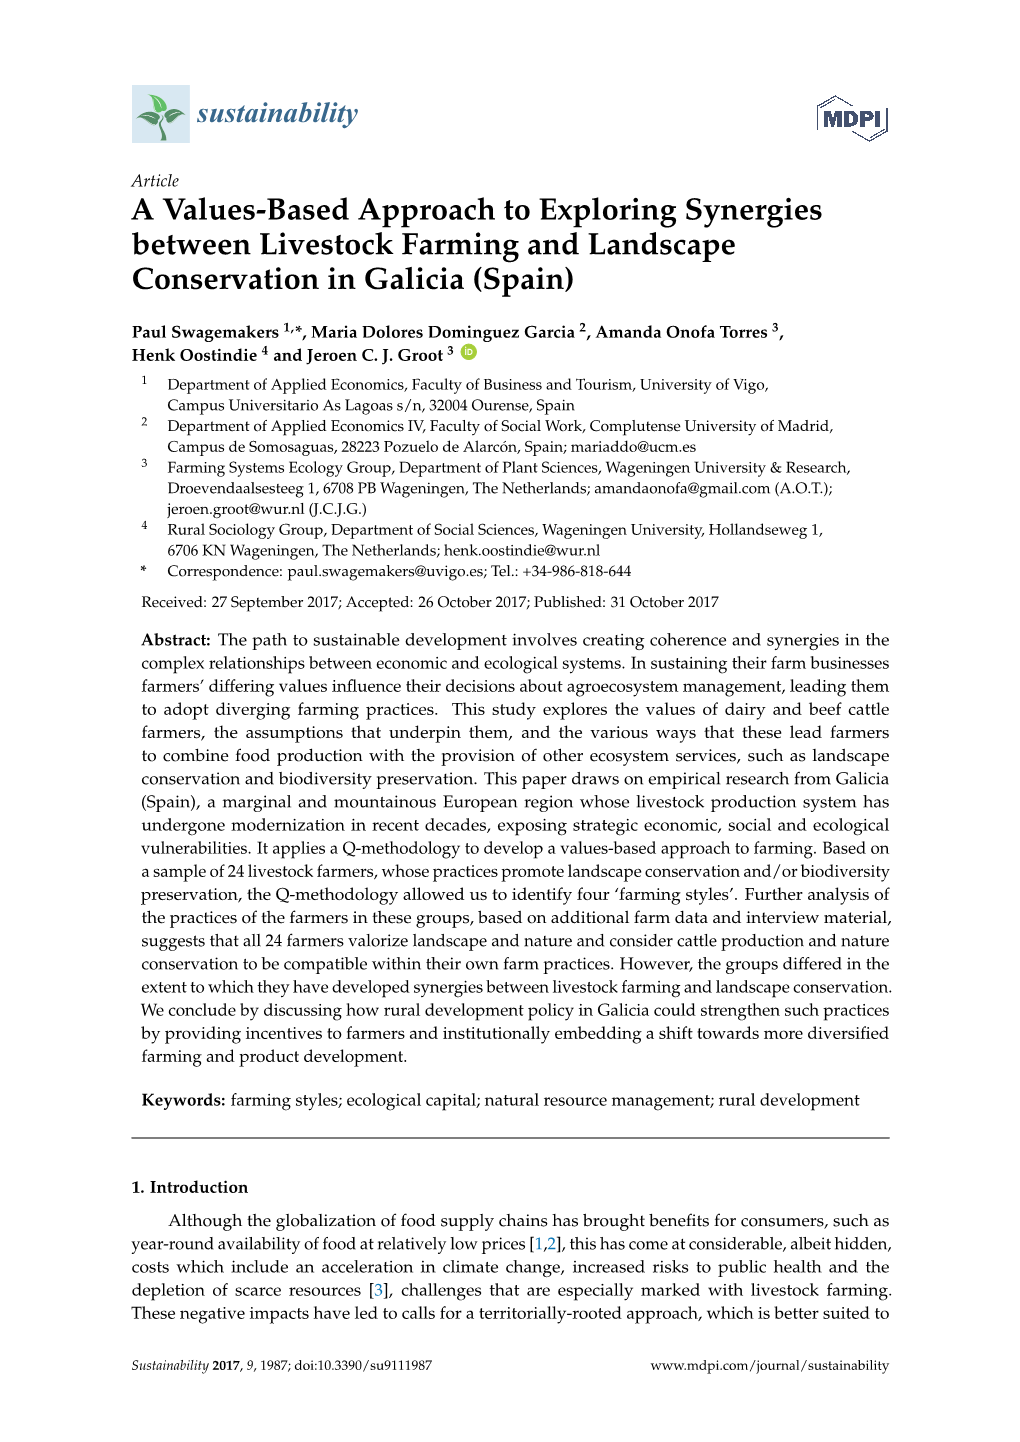 A Values-Based Approach to Exploring Synergies Between Livestock Farming and Landscape Conservation in Galicia (Spain)